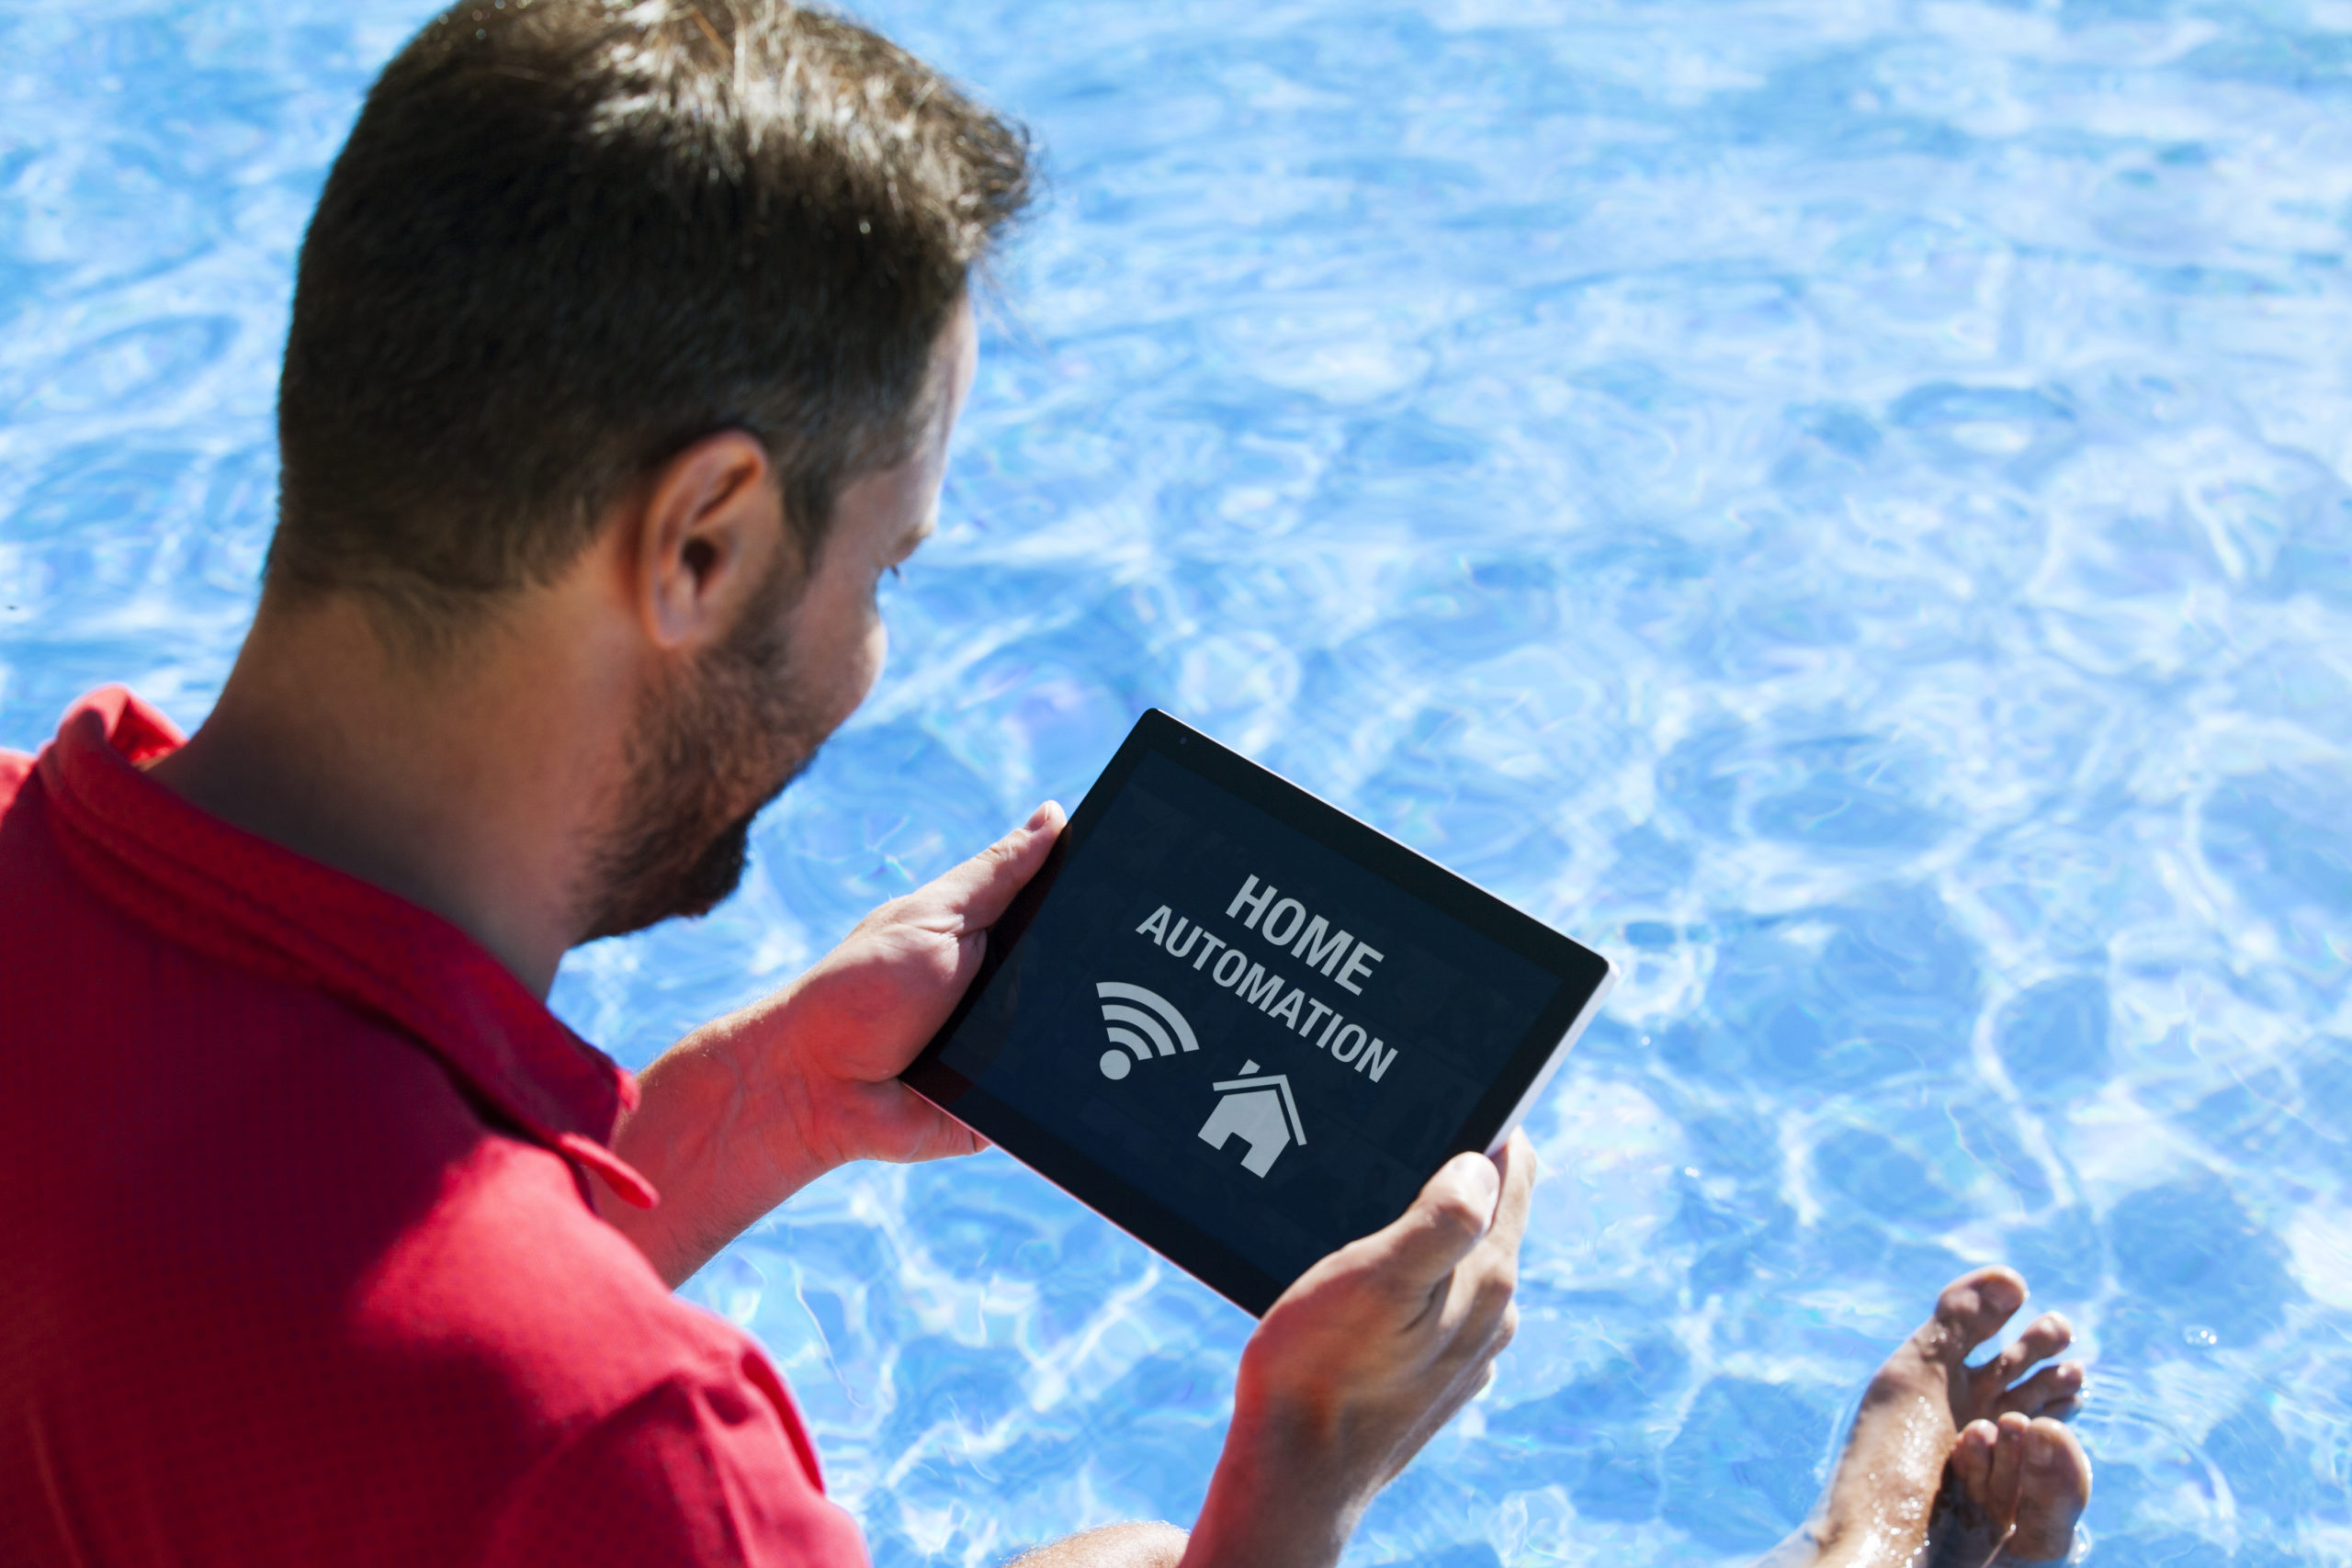 A smart device, such as a smartphone or tablet, being used to control and automate various functions of a swimming pool, including temperature, filtration, and lighting, for convenient and efficient management.